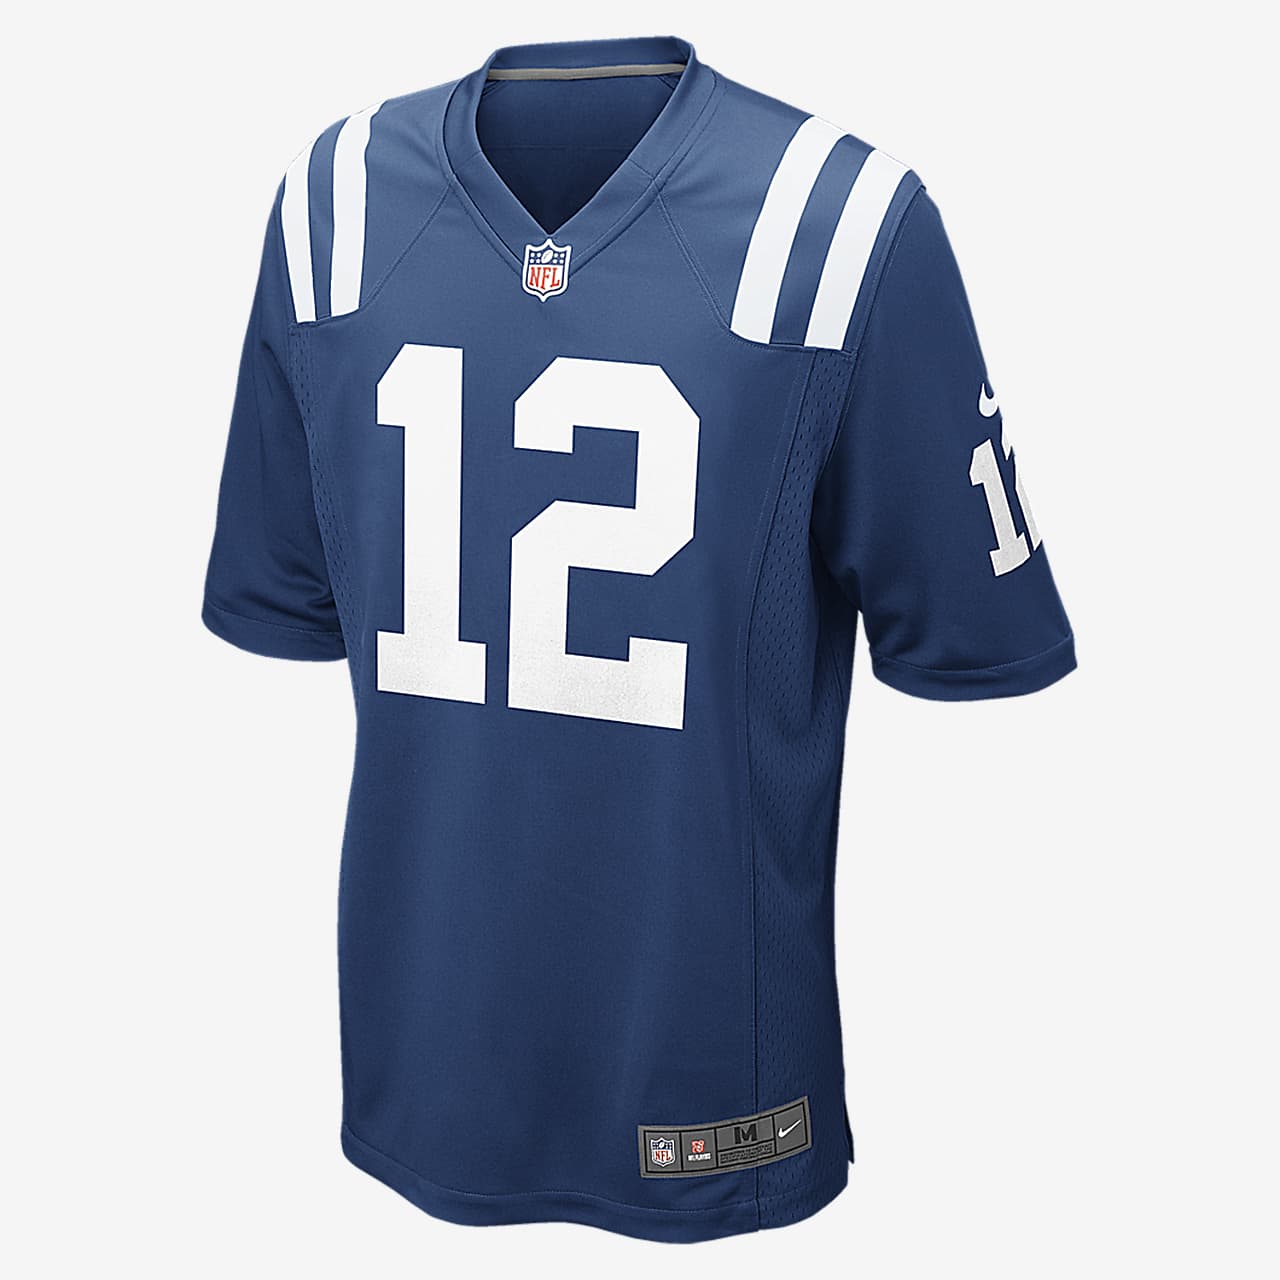 indianapolis colts white jersey